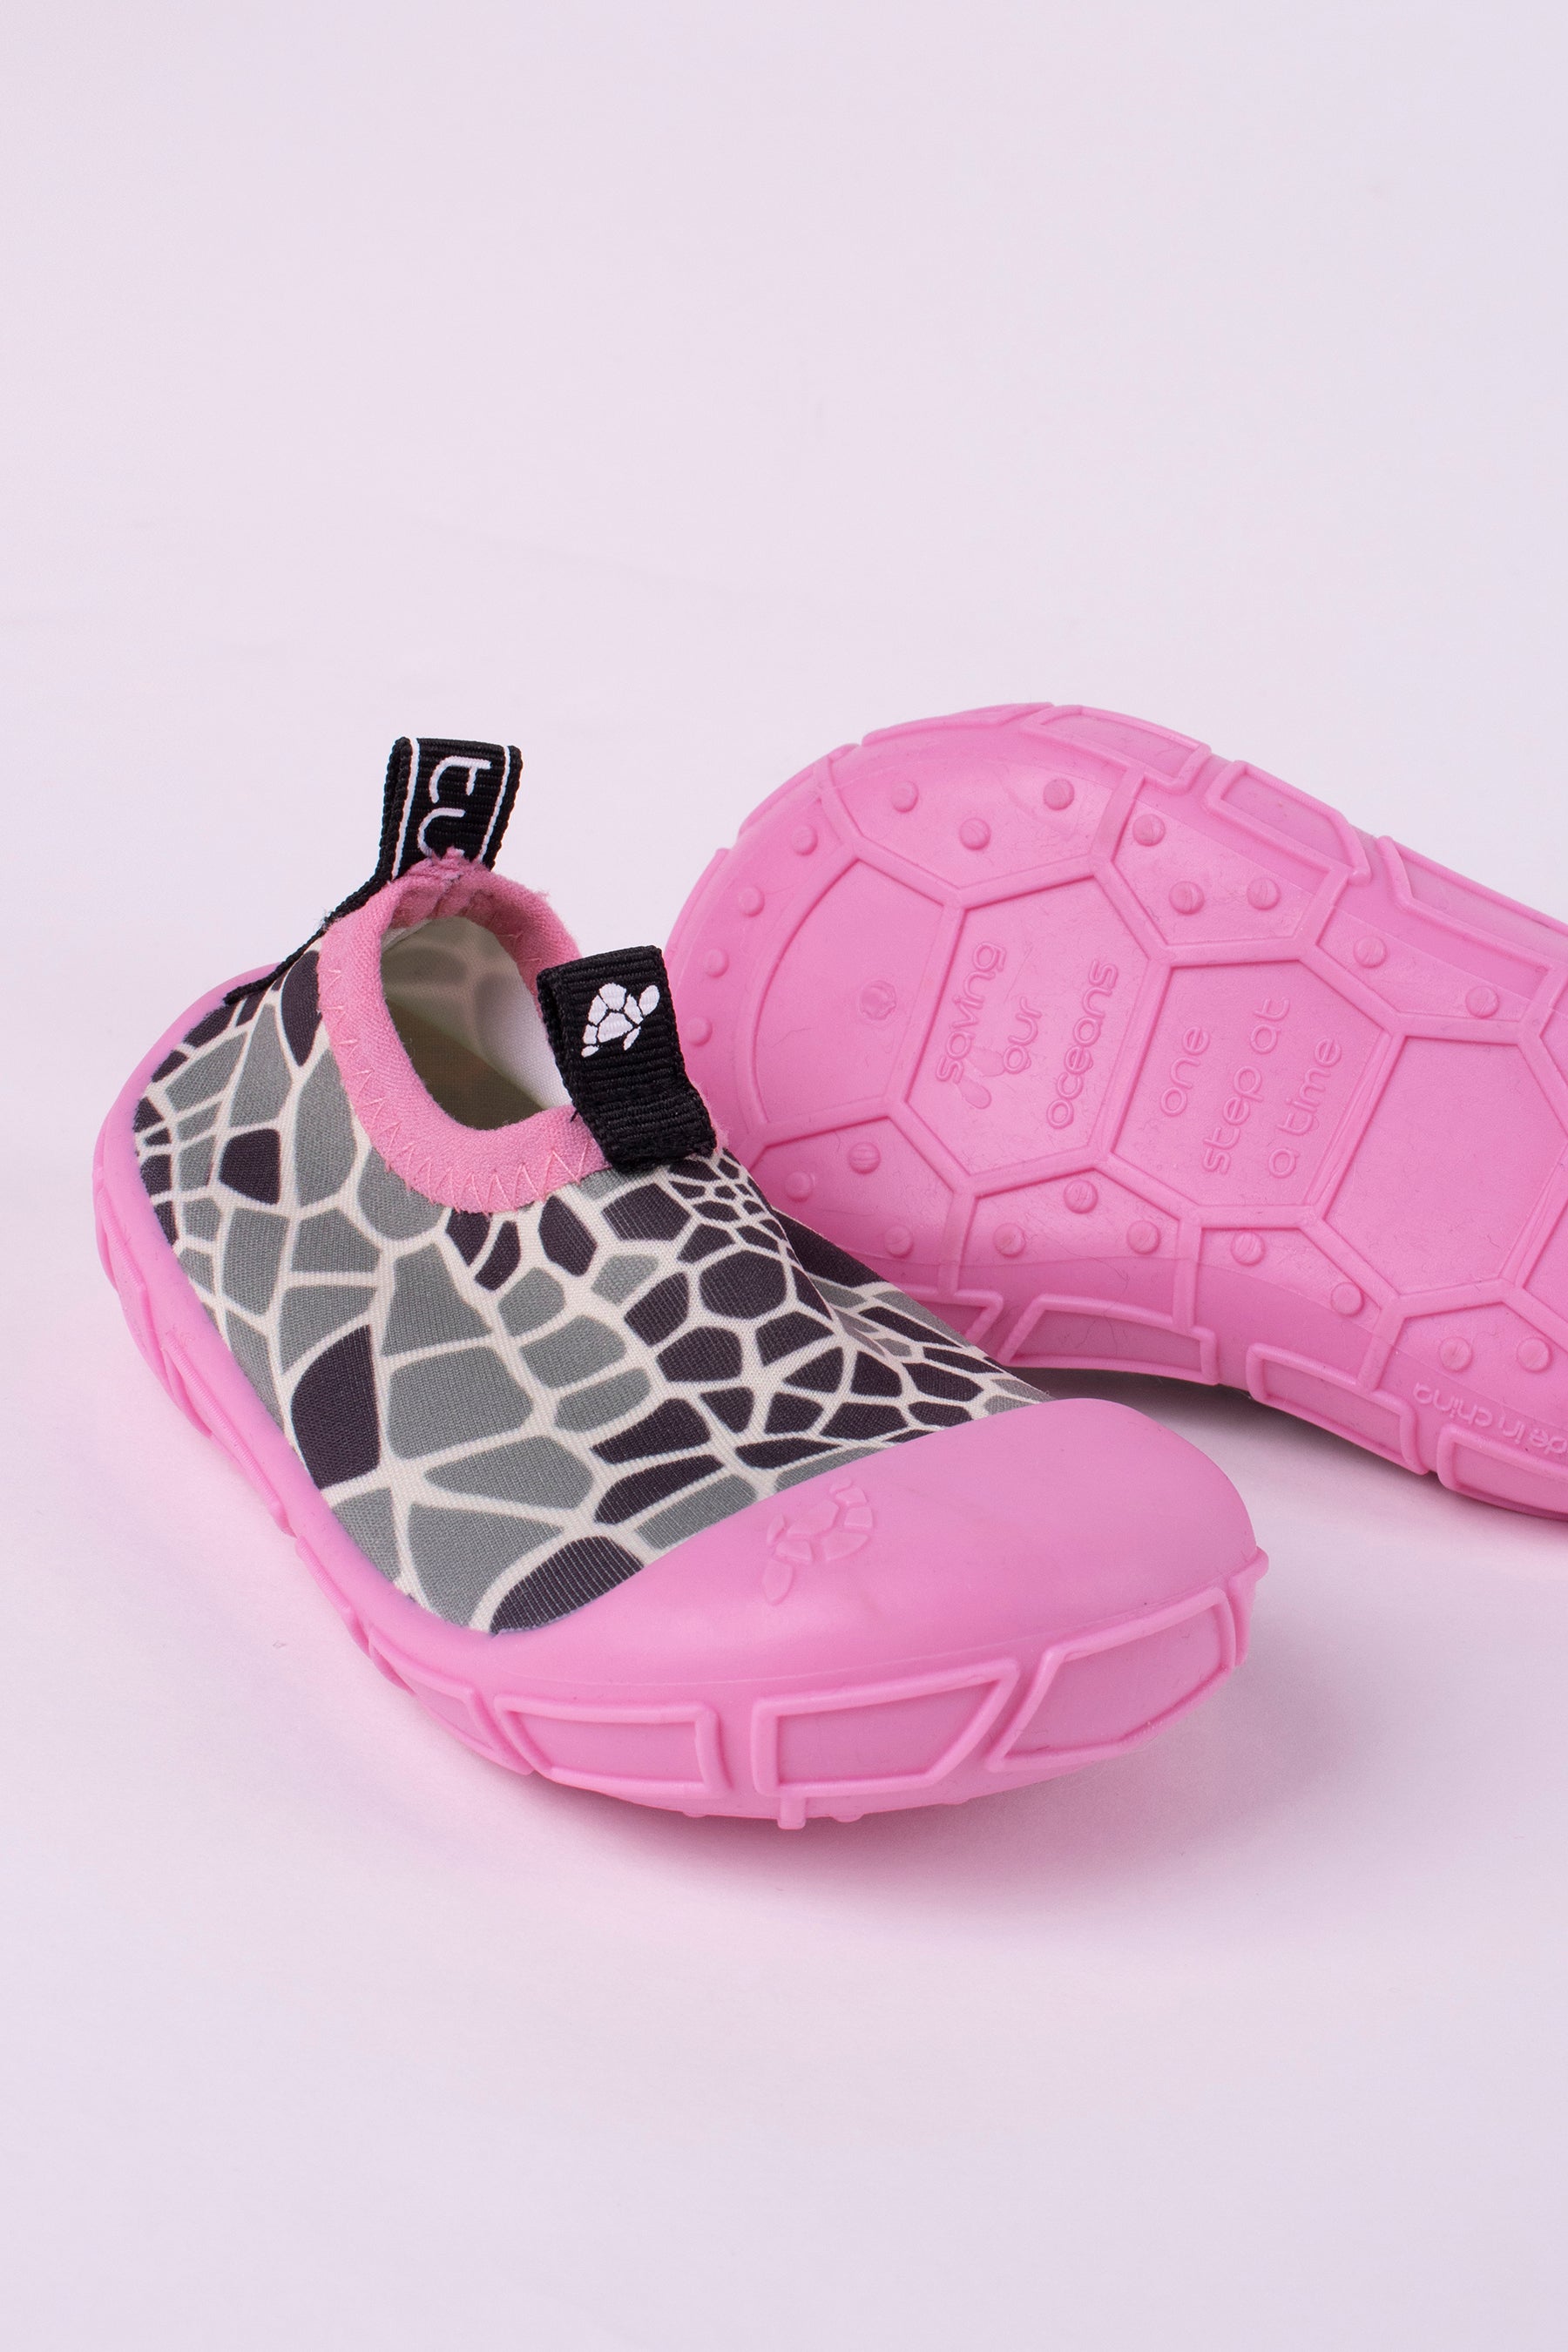 aqua/water shoes in pink with turtle shell print